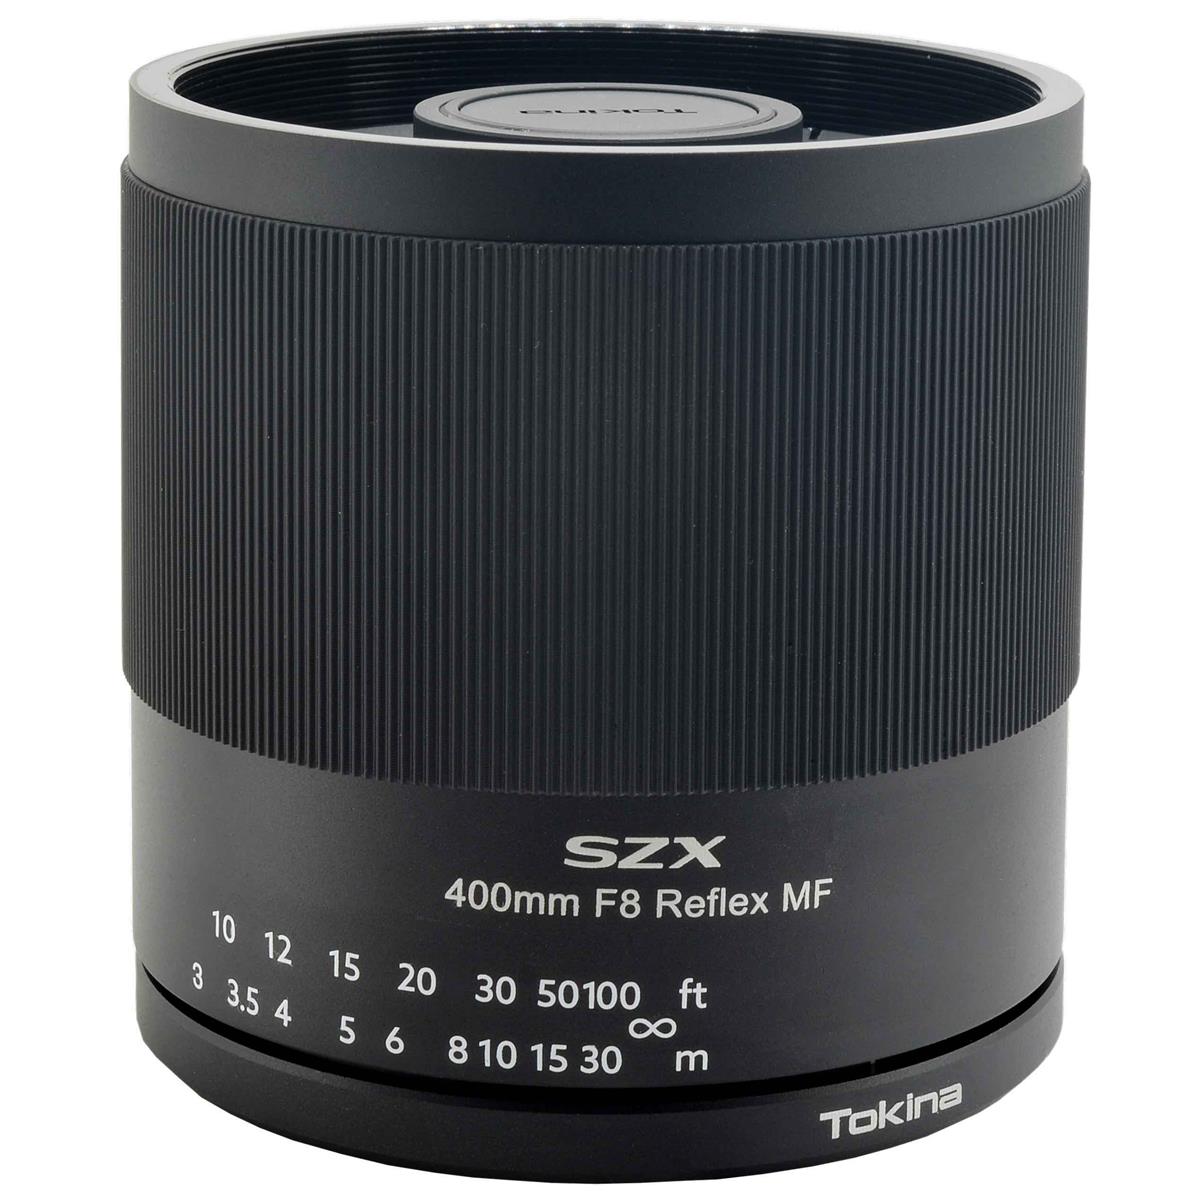 Image of Tokina SZX 400mm f/8 Reflex MF Lens for Canon RF